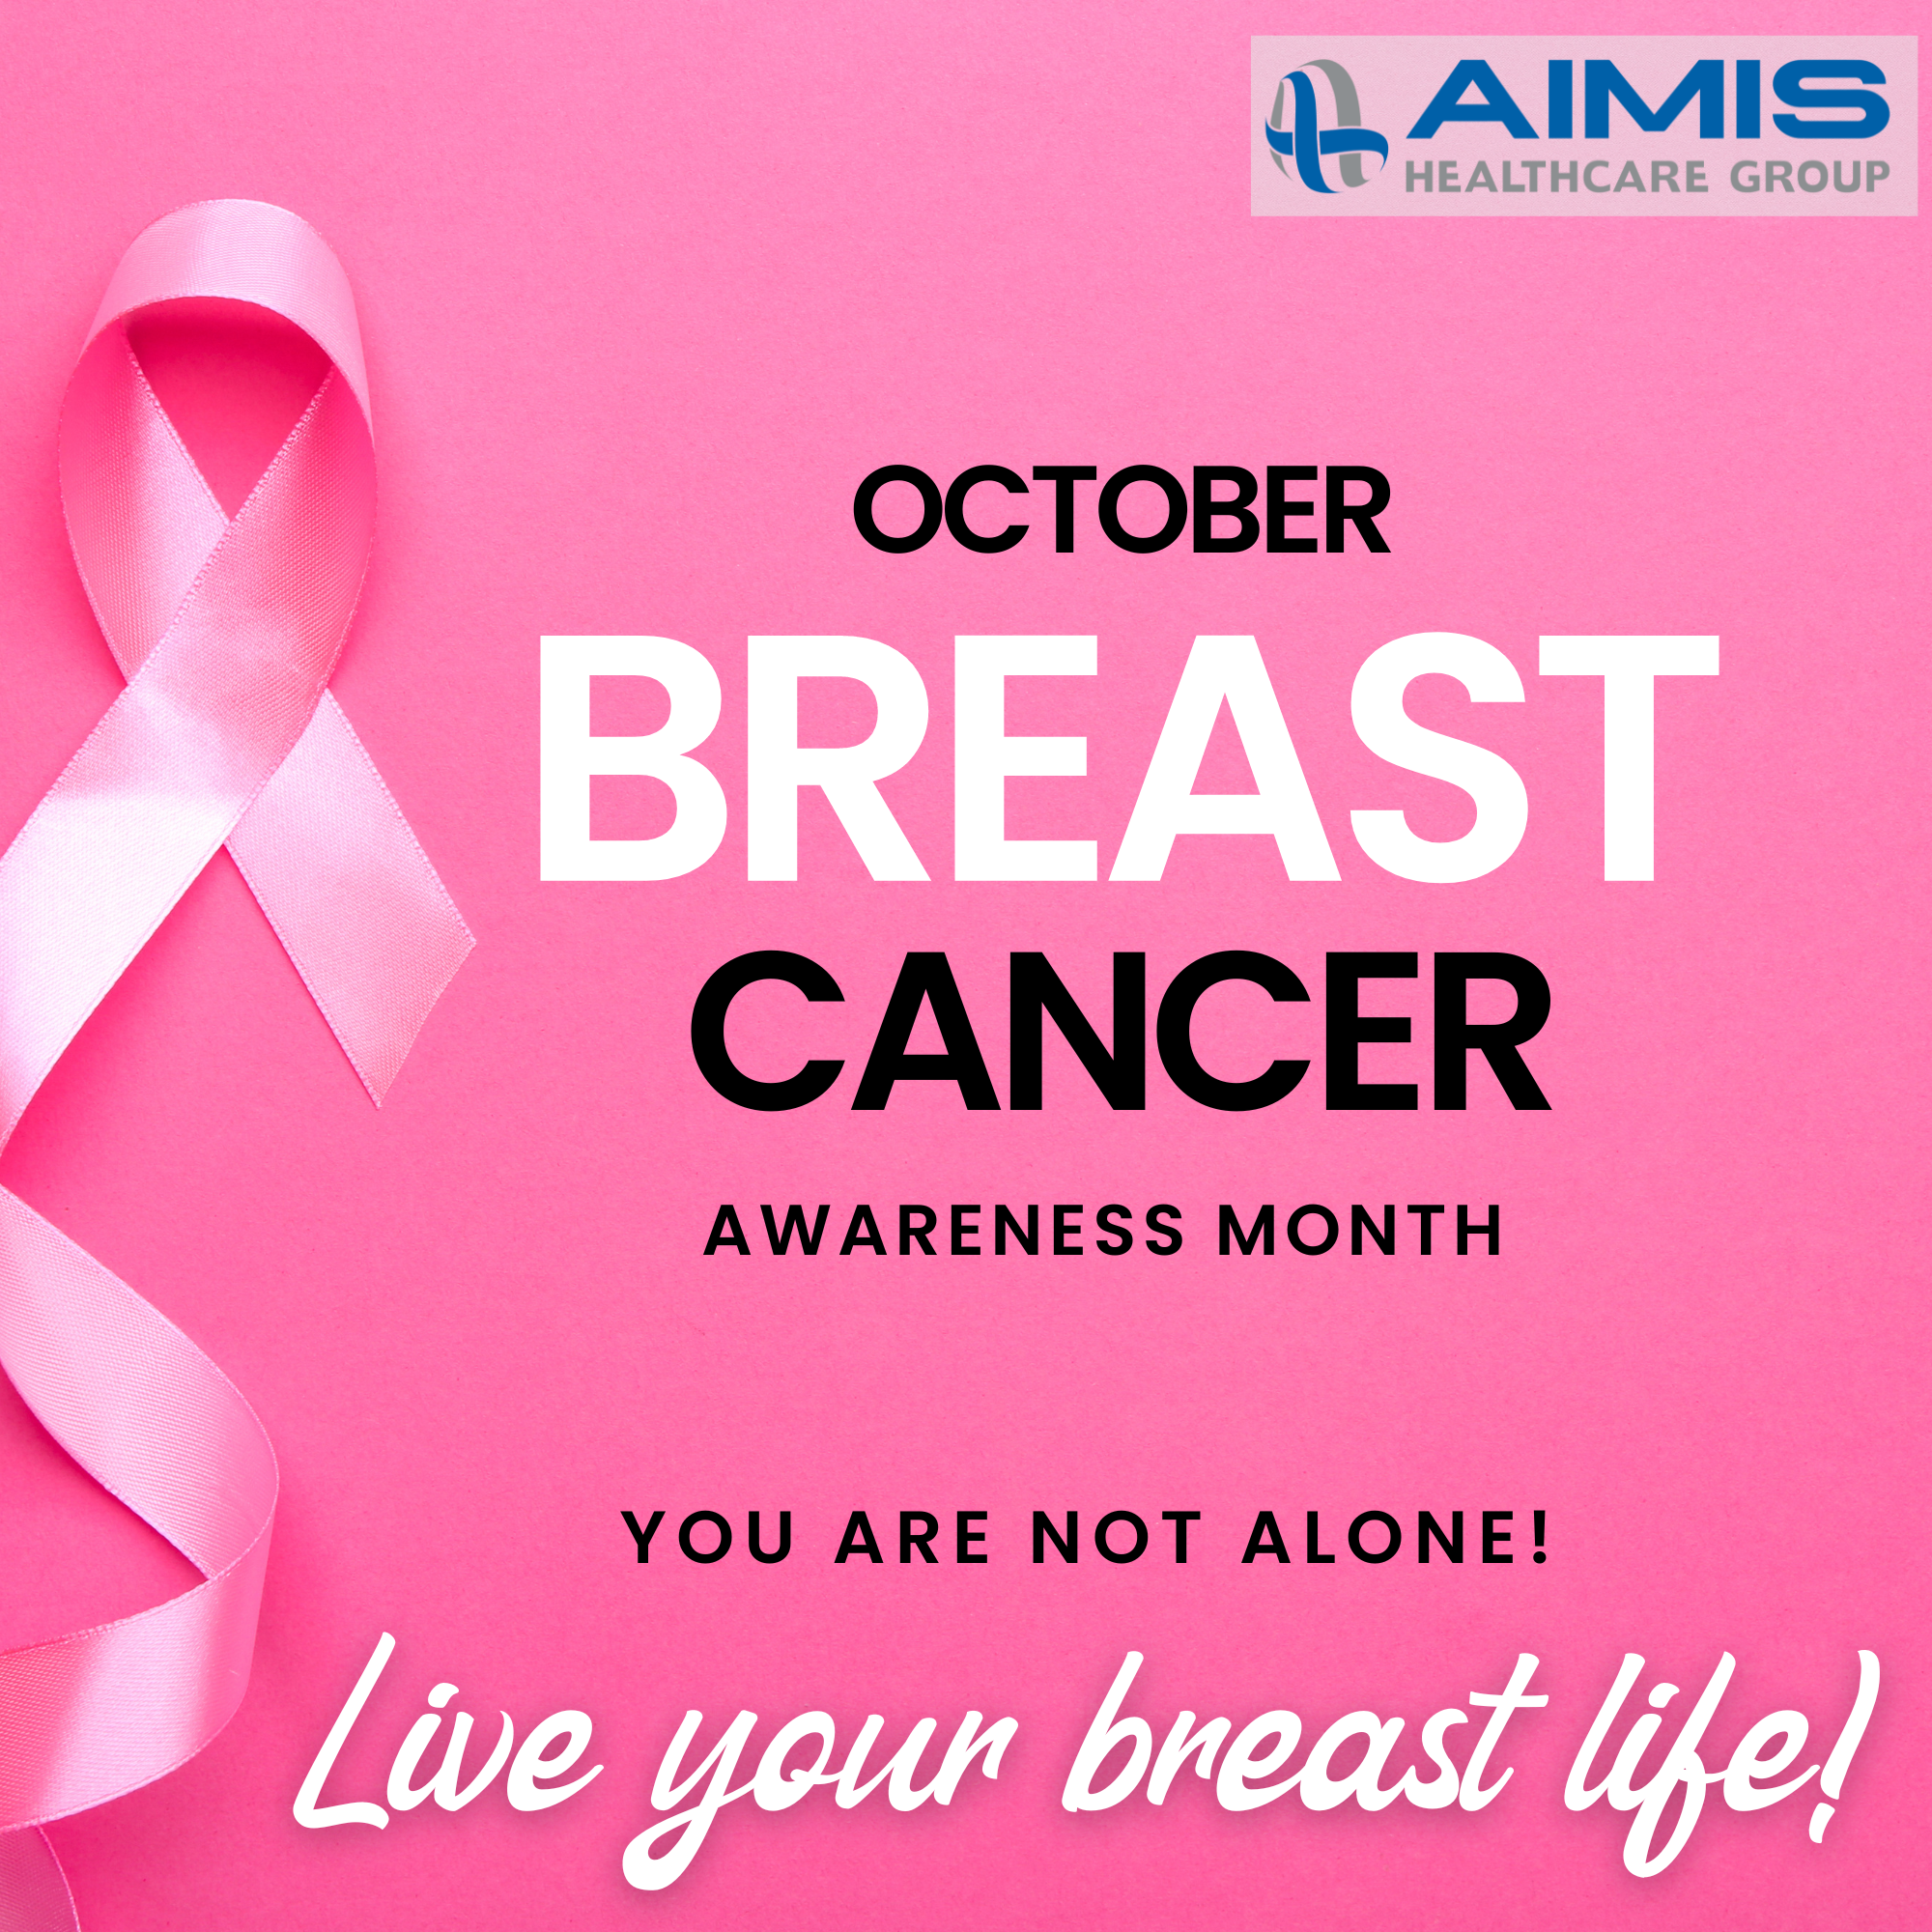 There can be life after breast cancer.